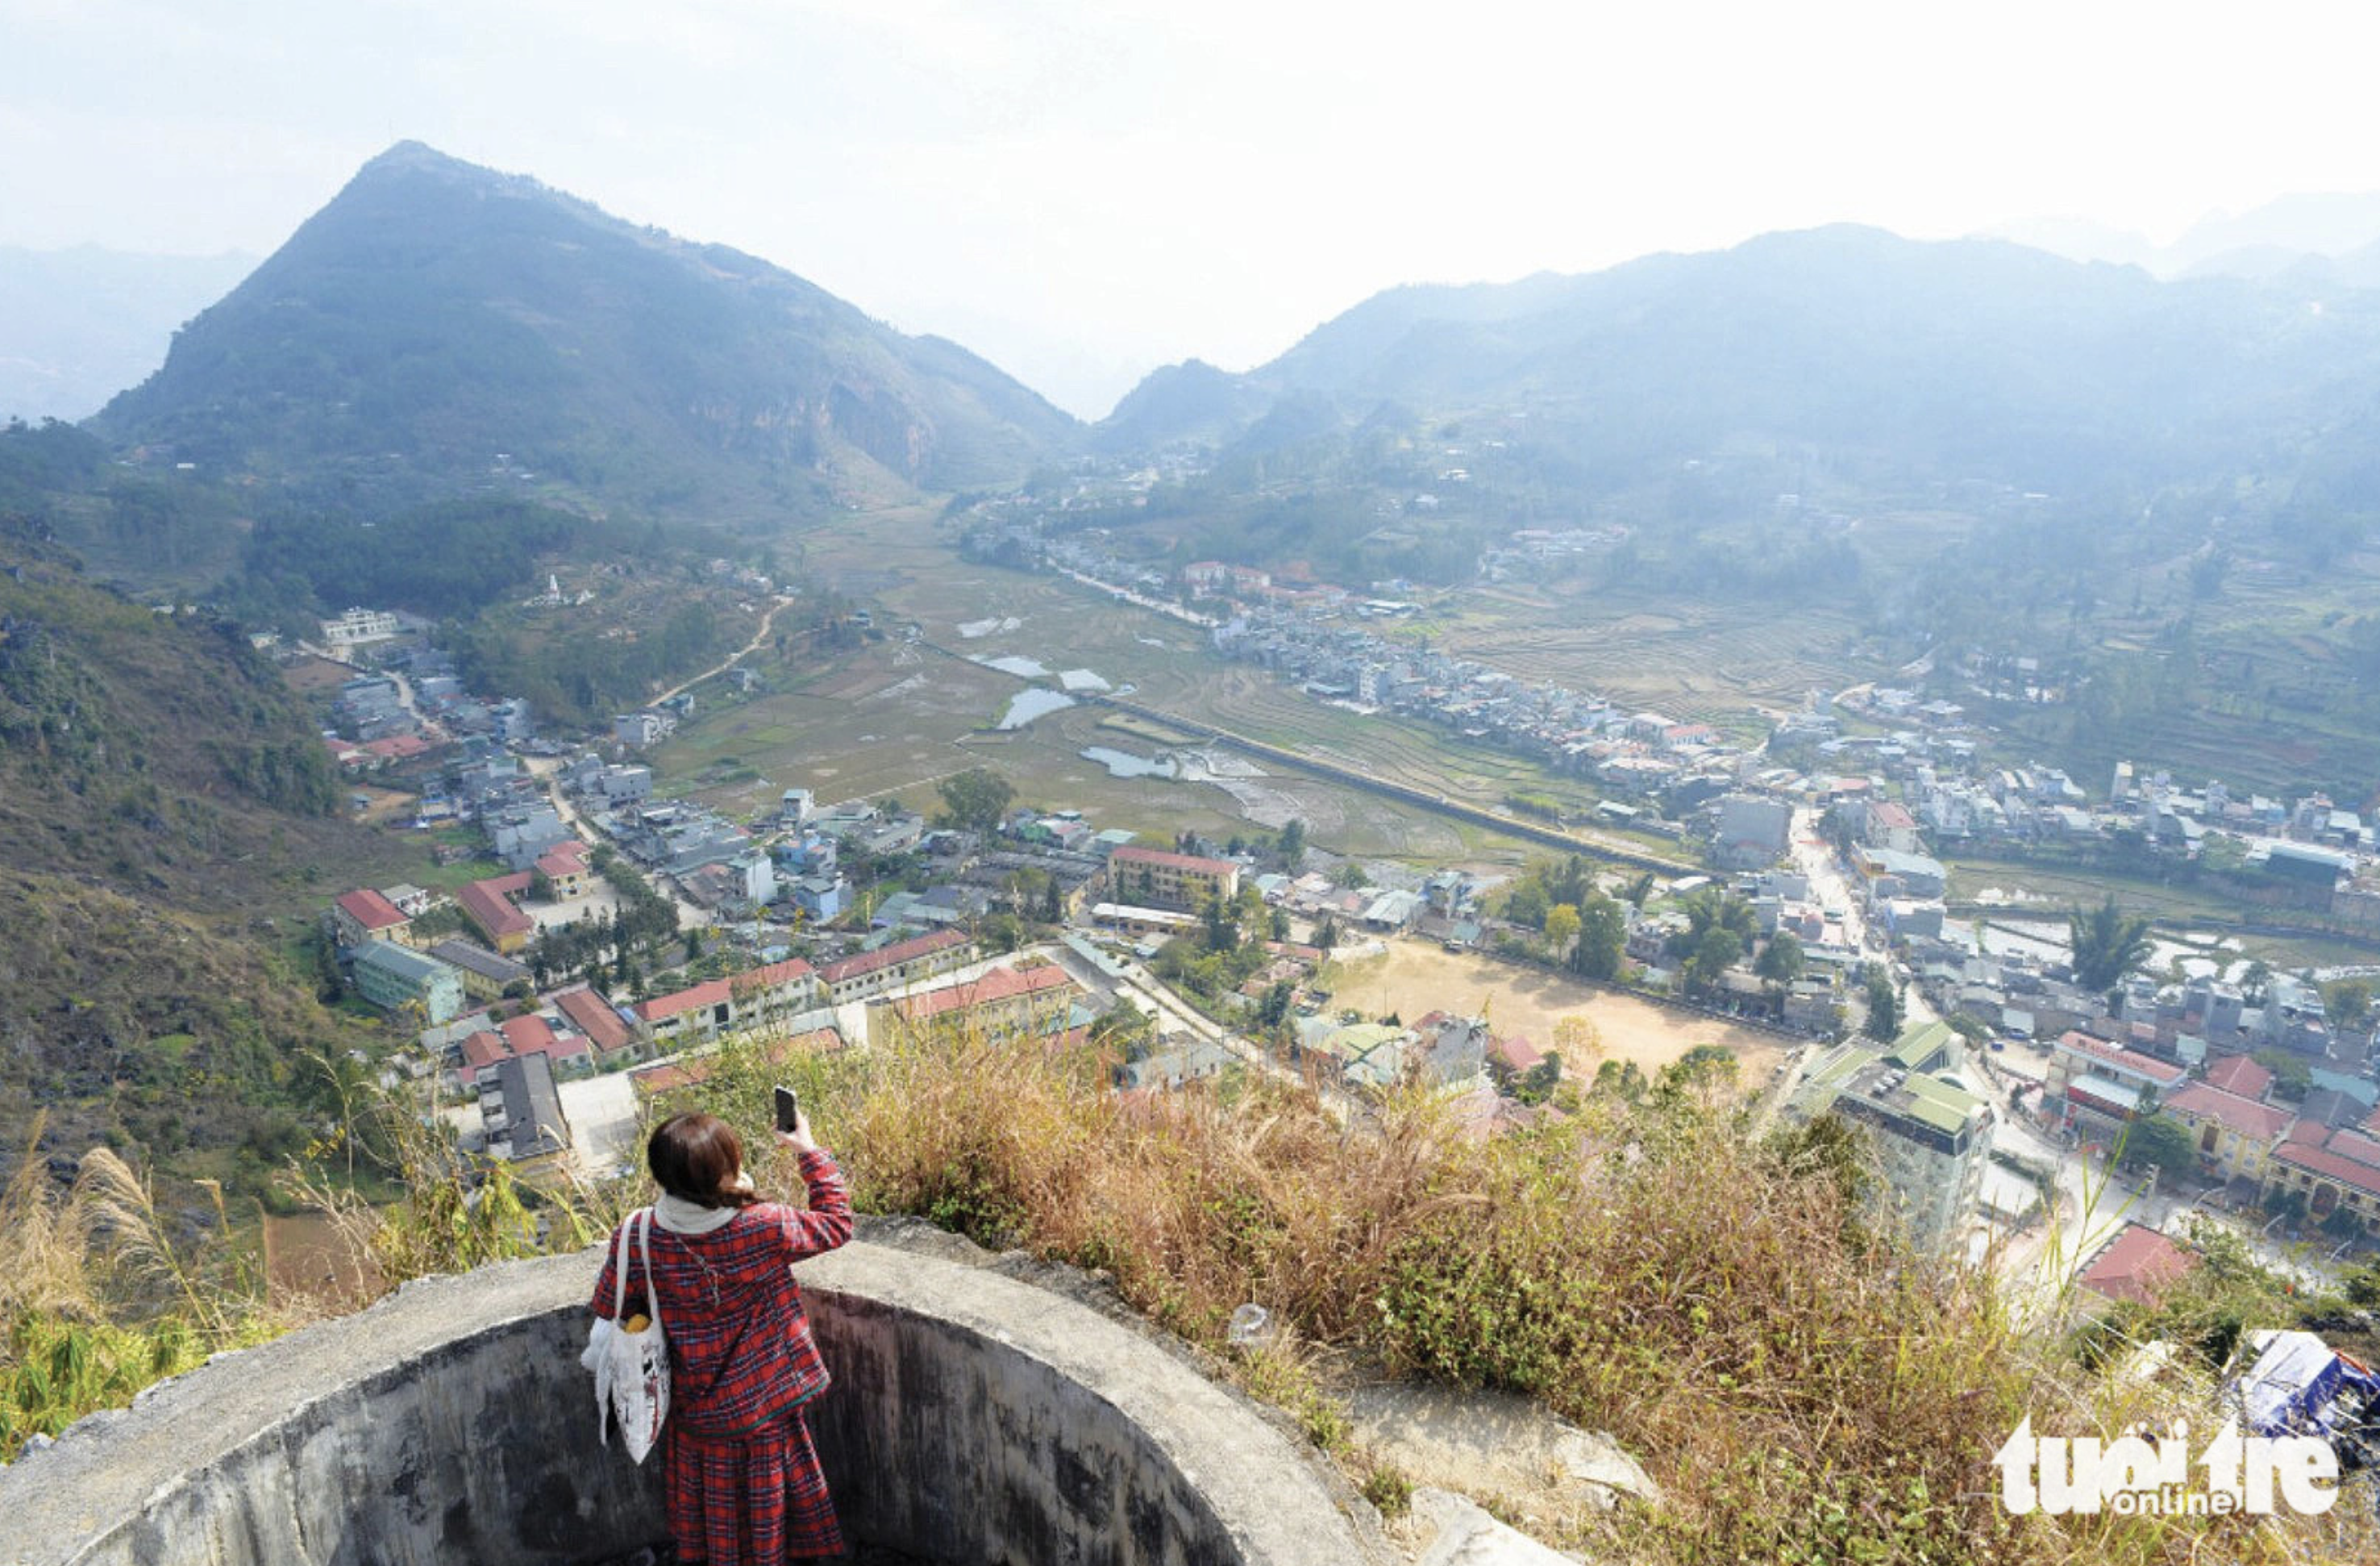 Historical relic sites in northern Vietnam draw young adventurers